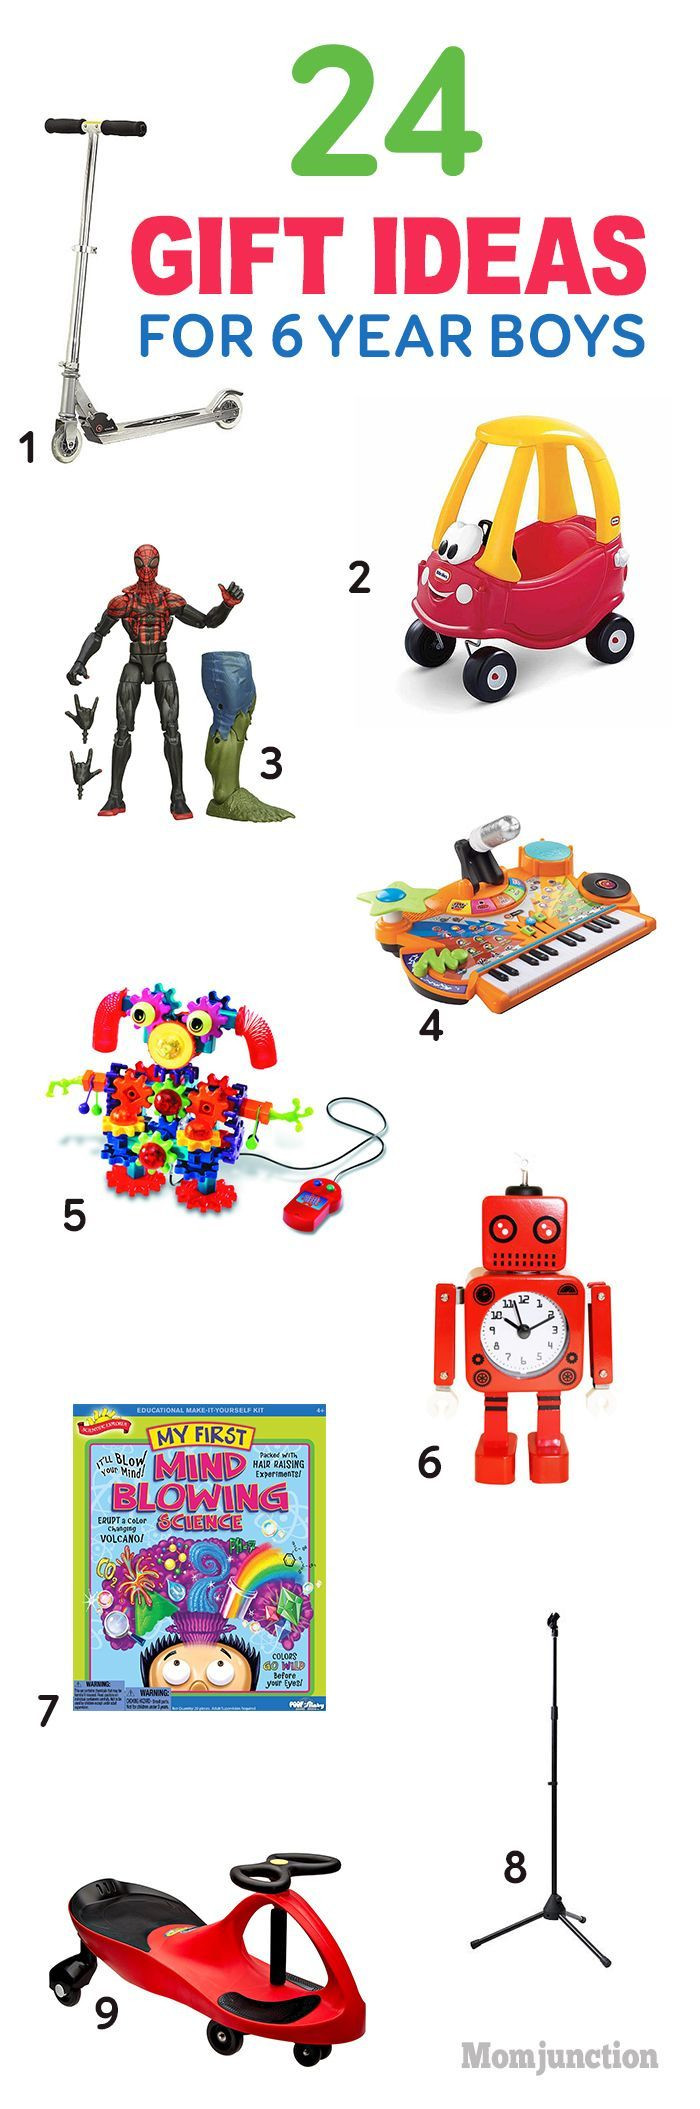 Christmas Gift Ideas For 6 Year Old Boy
 17 Best images about Toys for 7 year old boy on Pinterest